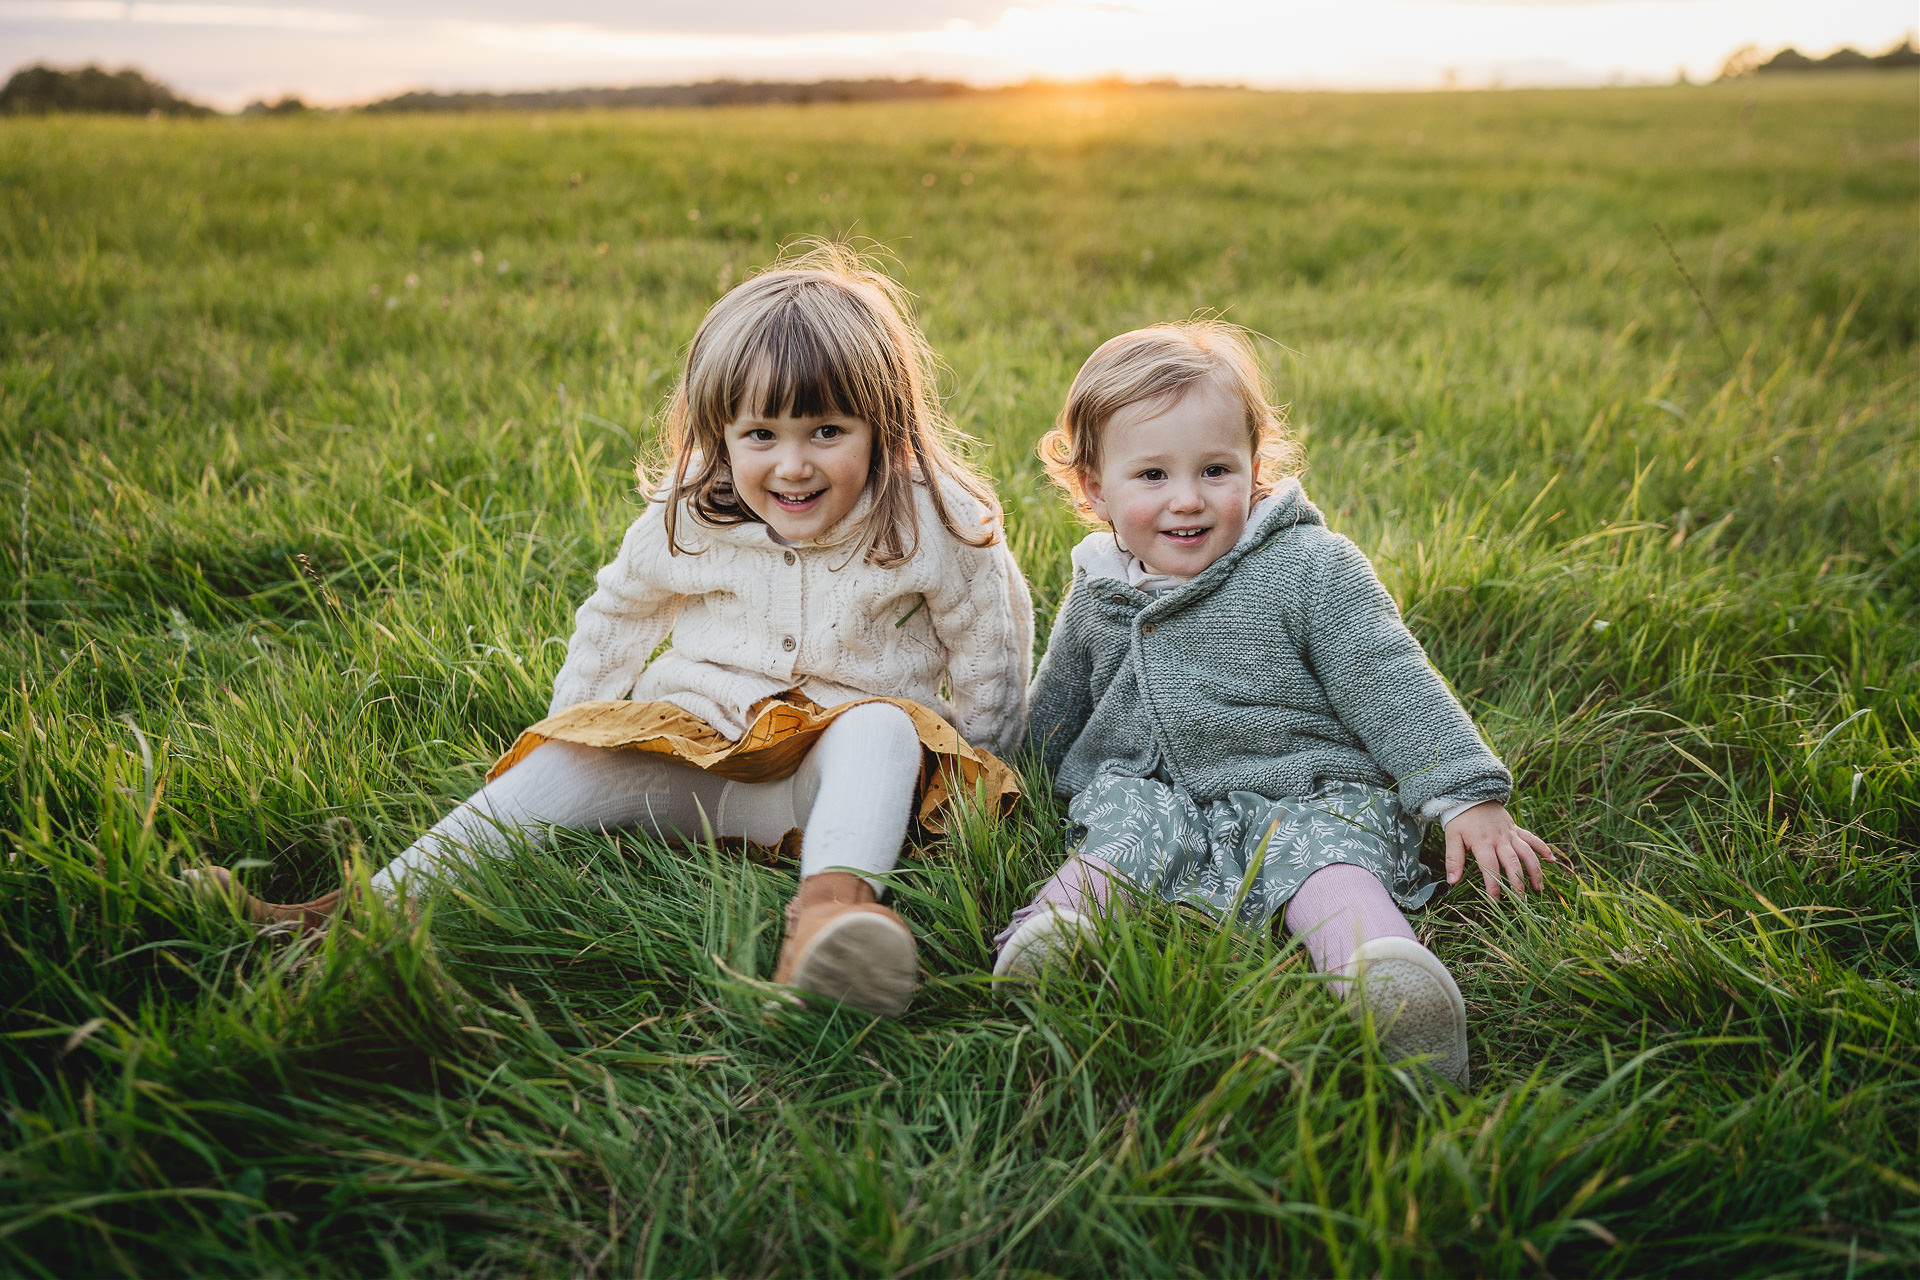 Two young sisters sitting in a field together with sunset behind